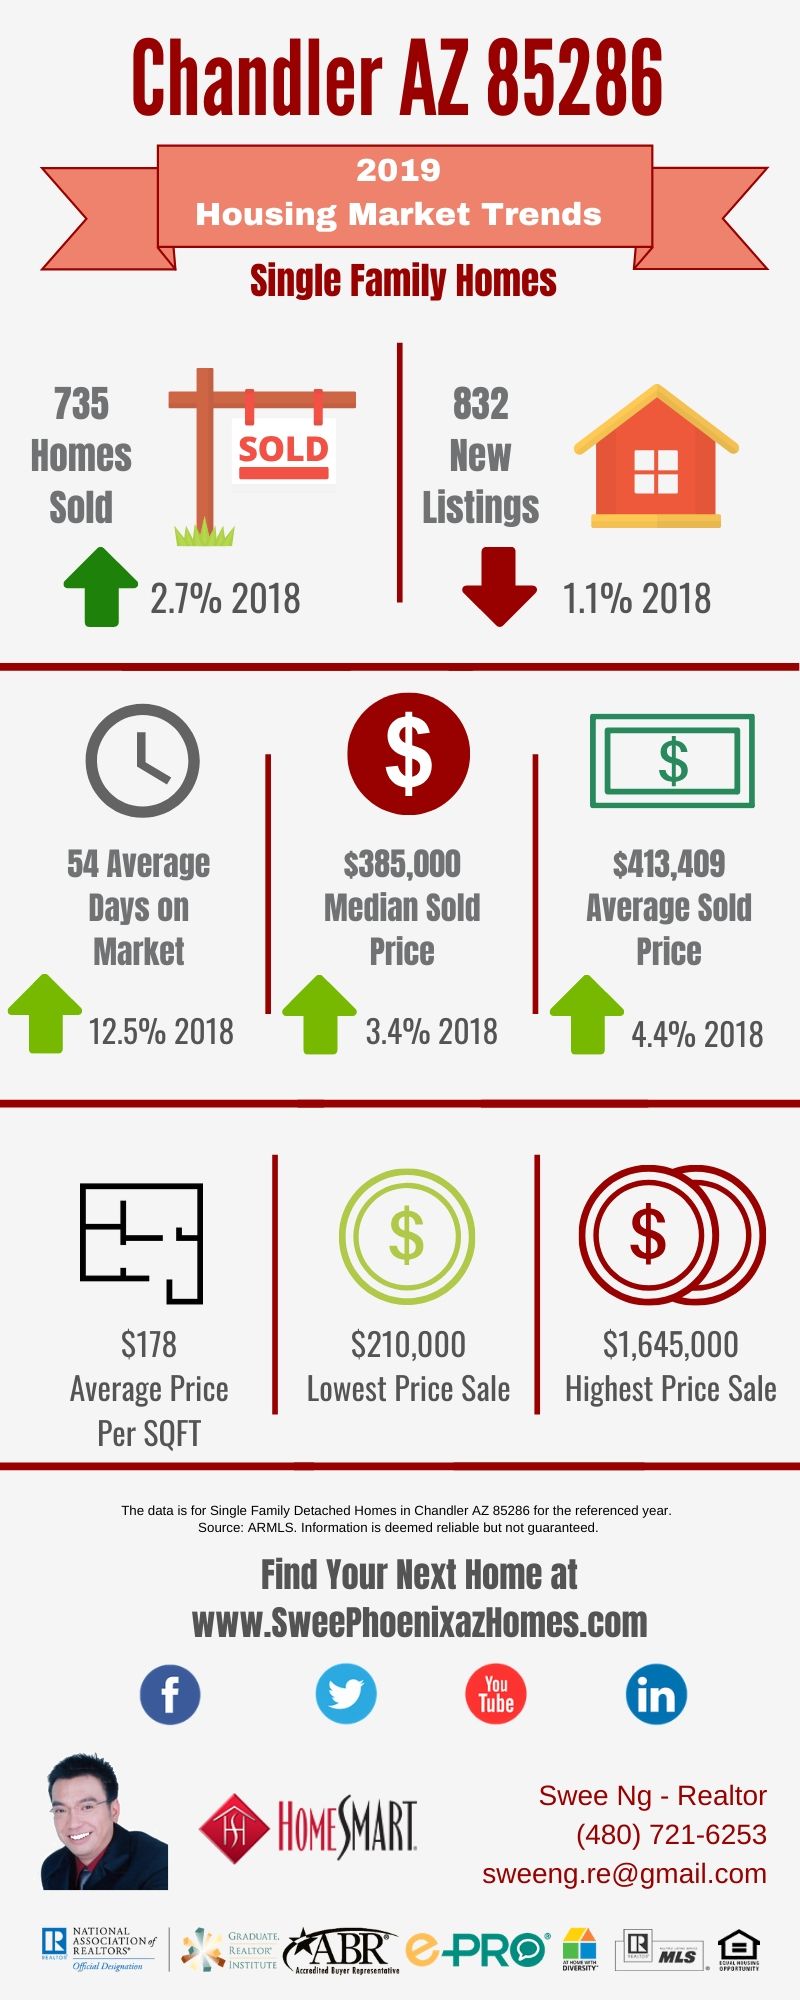 Chandler AZ 85286 Housing Market Trends Report 2019, House Value, Real Estate and Statistic by Swee Ng